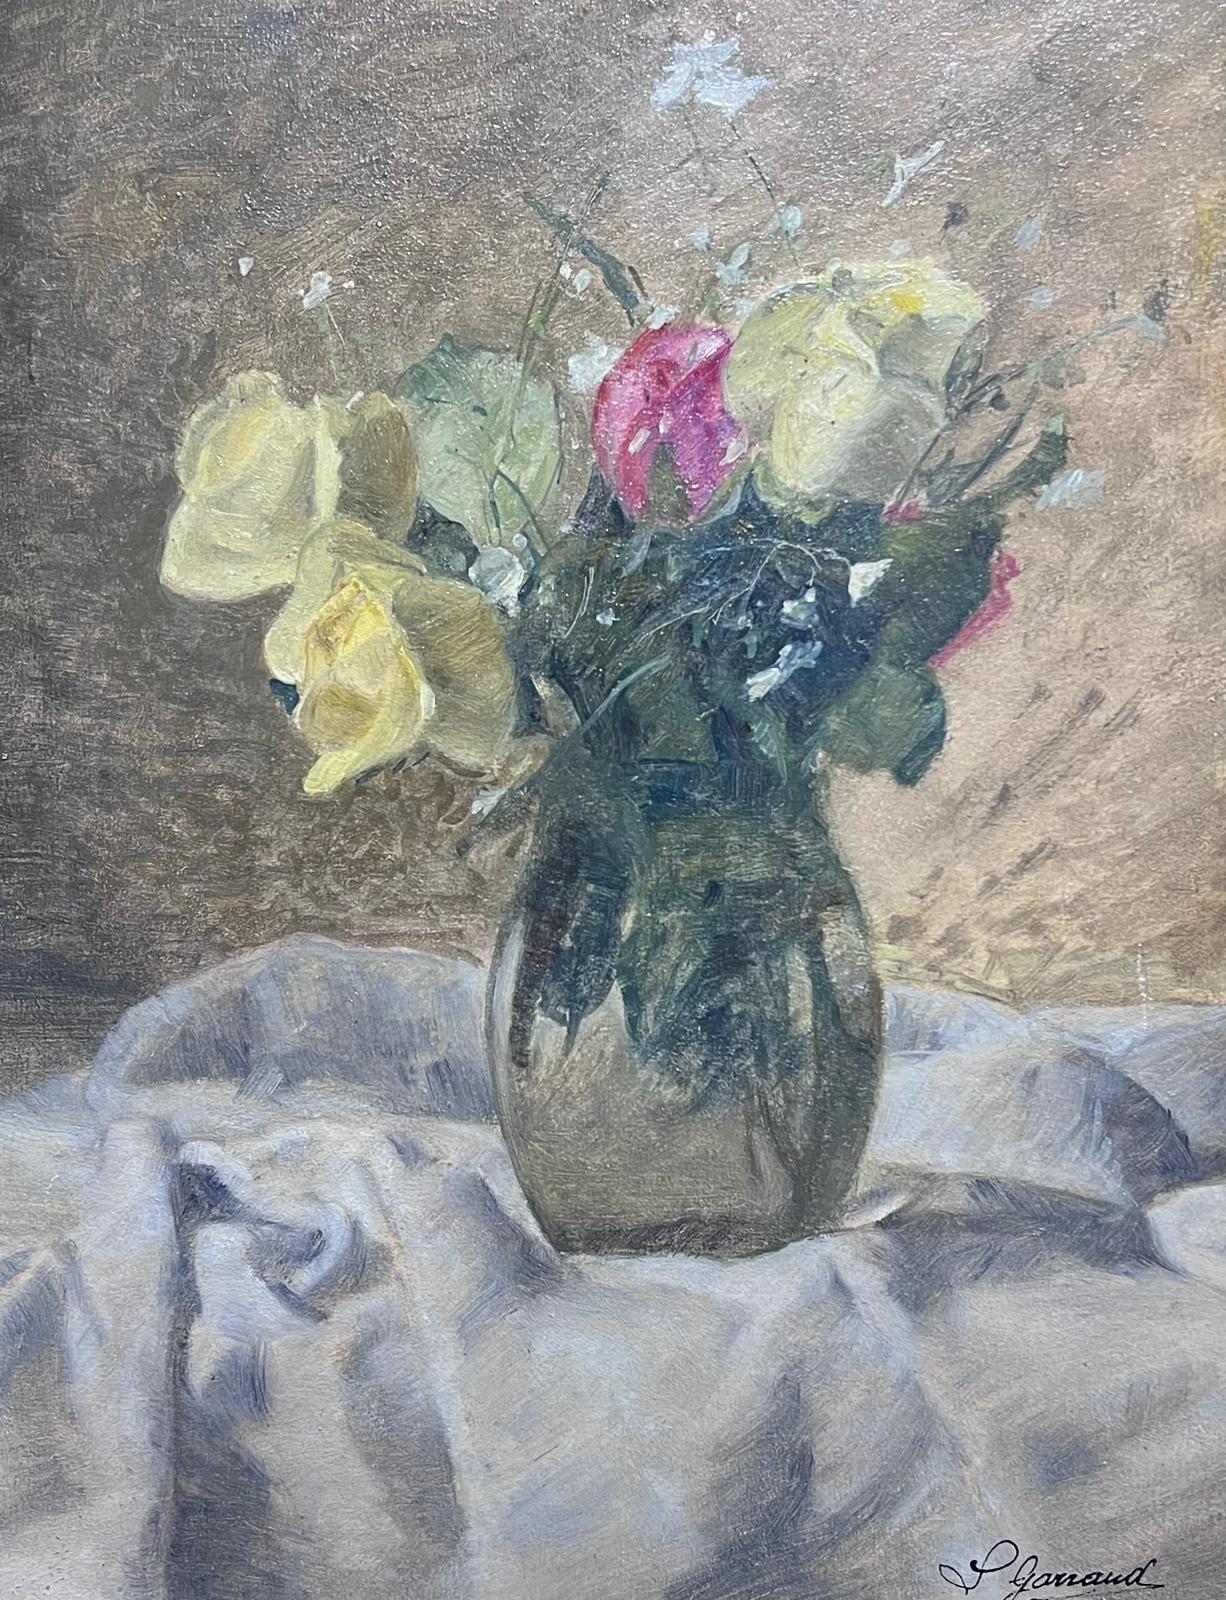 Bouquet de Roses
by Leon Garraud (French 1877-1967)
signed oil on board, framed
framed: 19 x 16 inches
board: 15.5 x 12 inches
inscribed verso to label
provenance: private collection, France
condition: good and sound condition